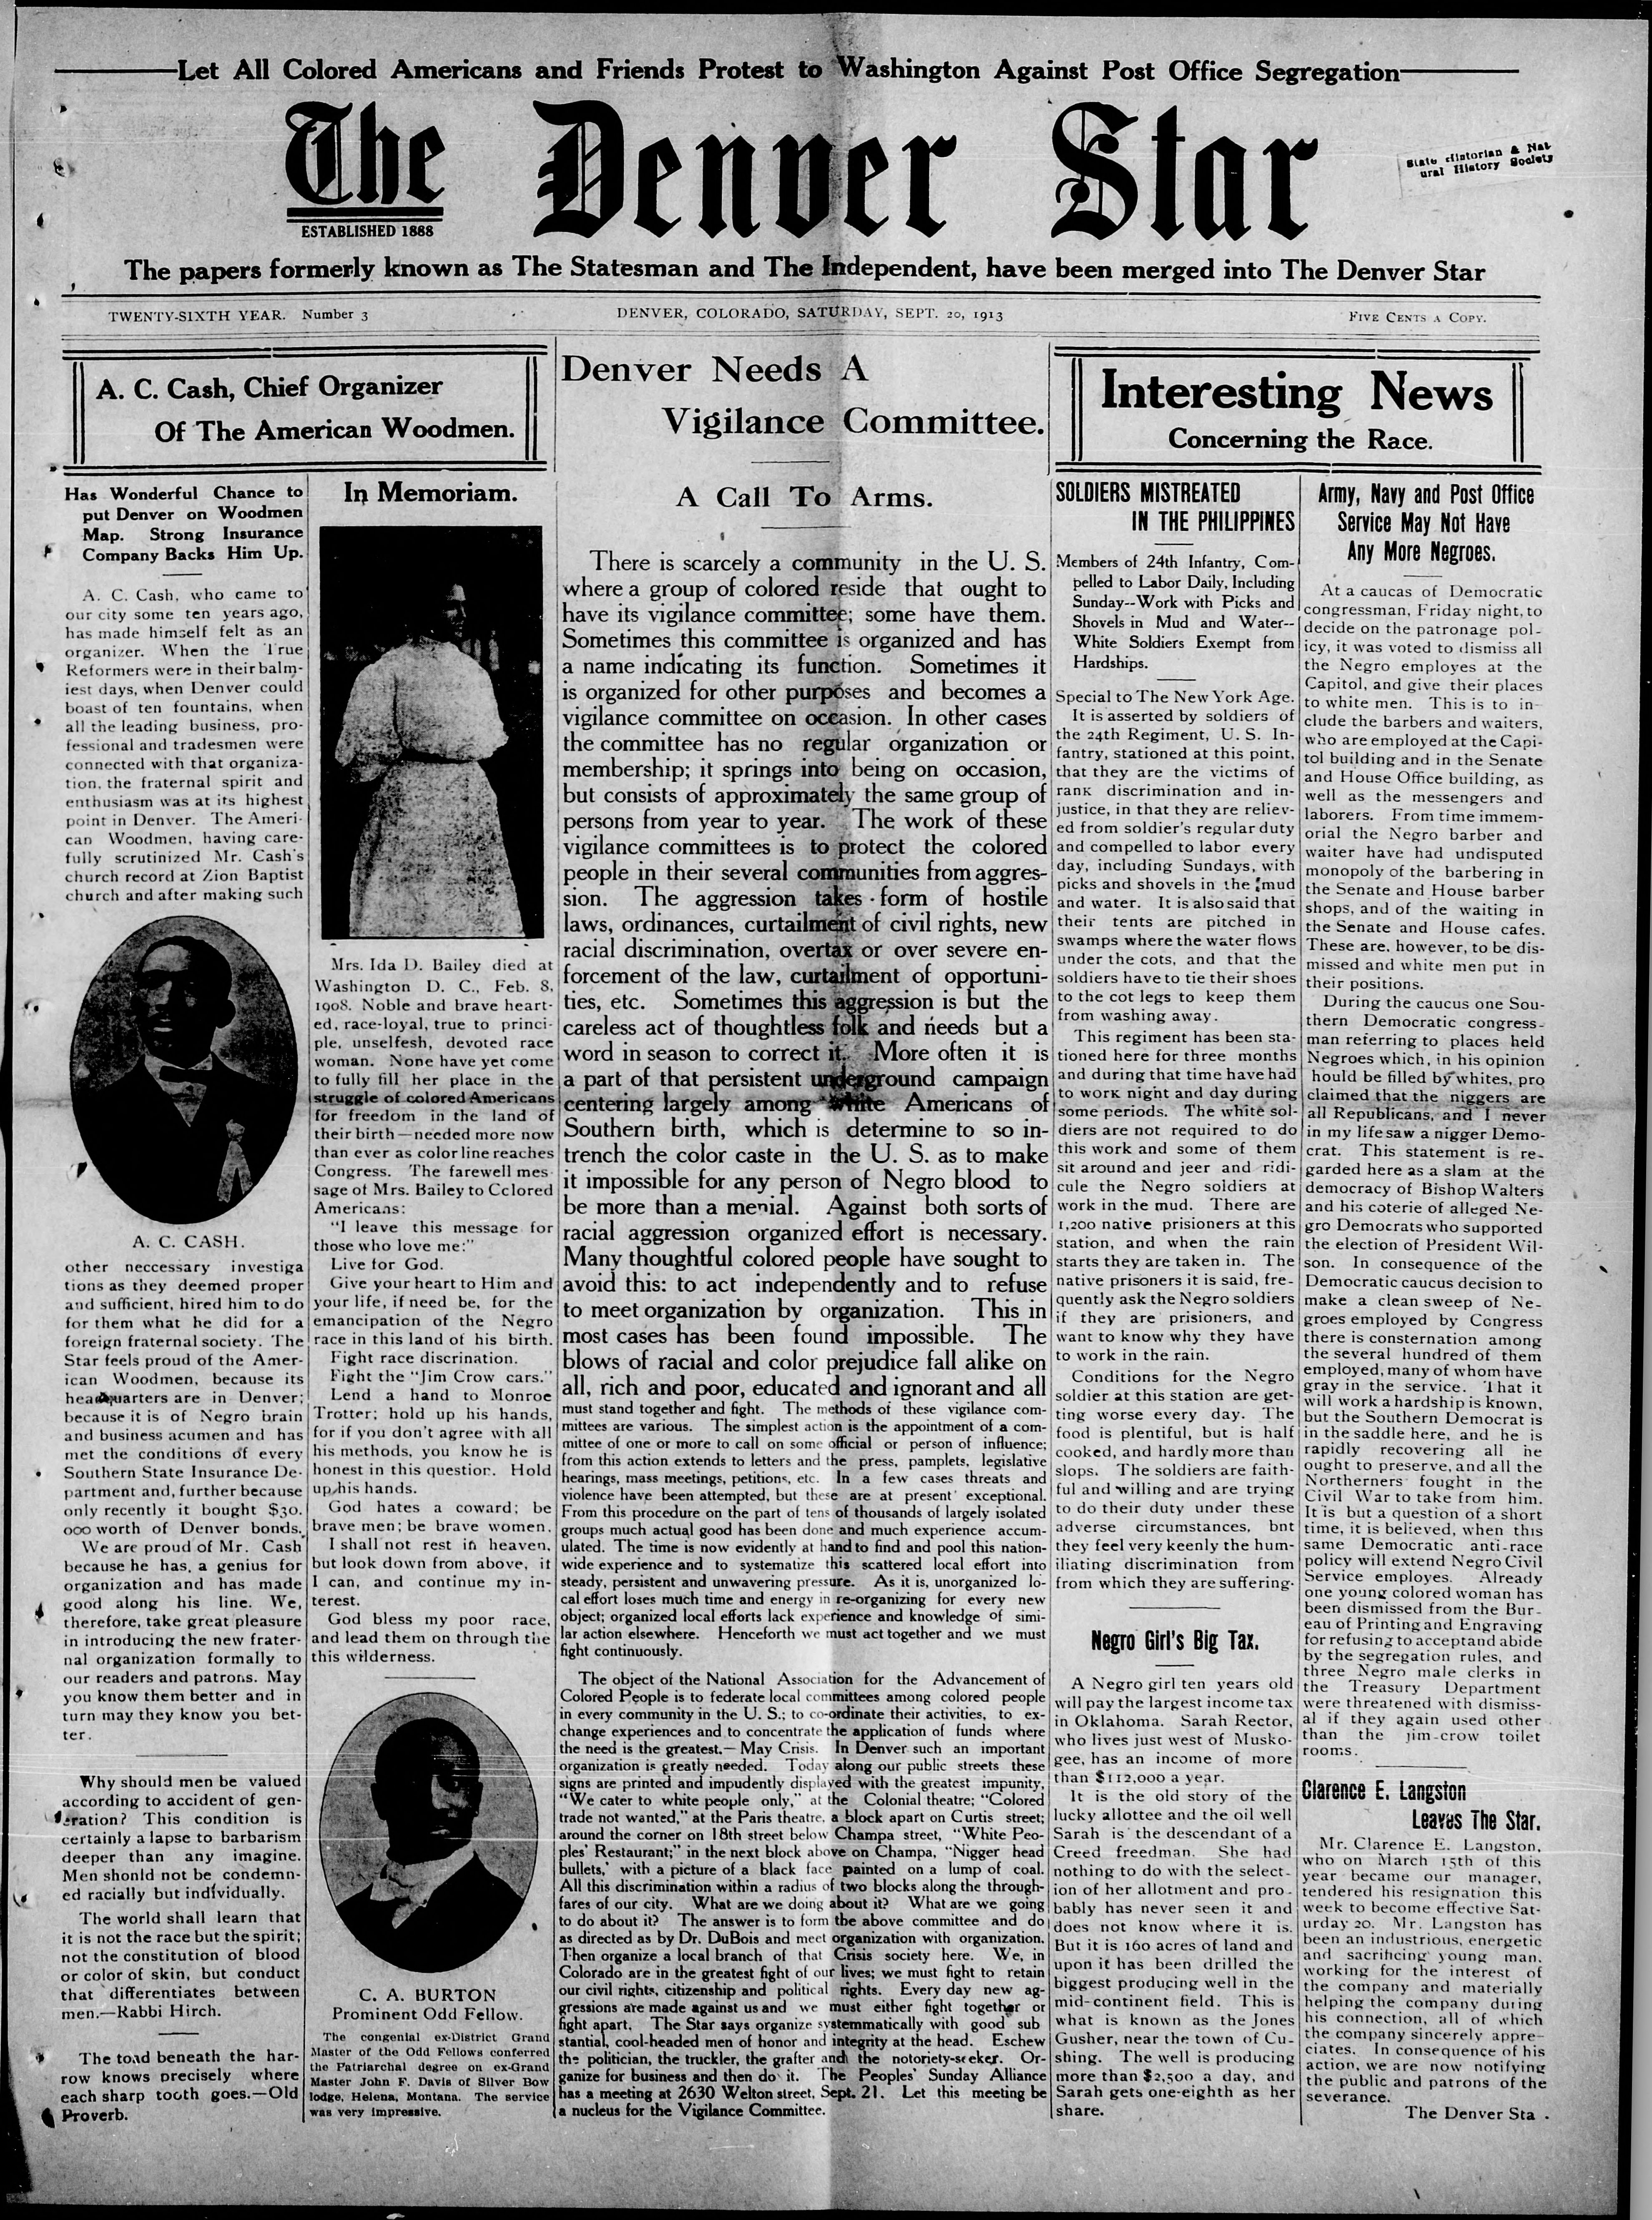 Digital image of the front page of Denver newspaper, The Denver Star, dated September 20, 1913. One of the main headlines reads, "Denver Needs a Vigilance Committee - A Call to Arms."